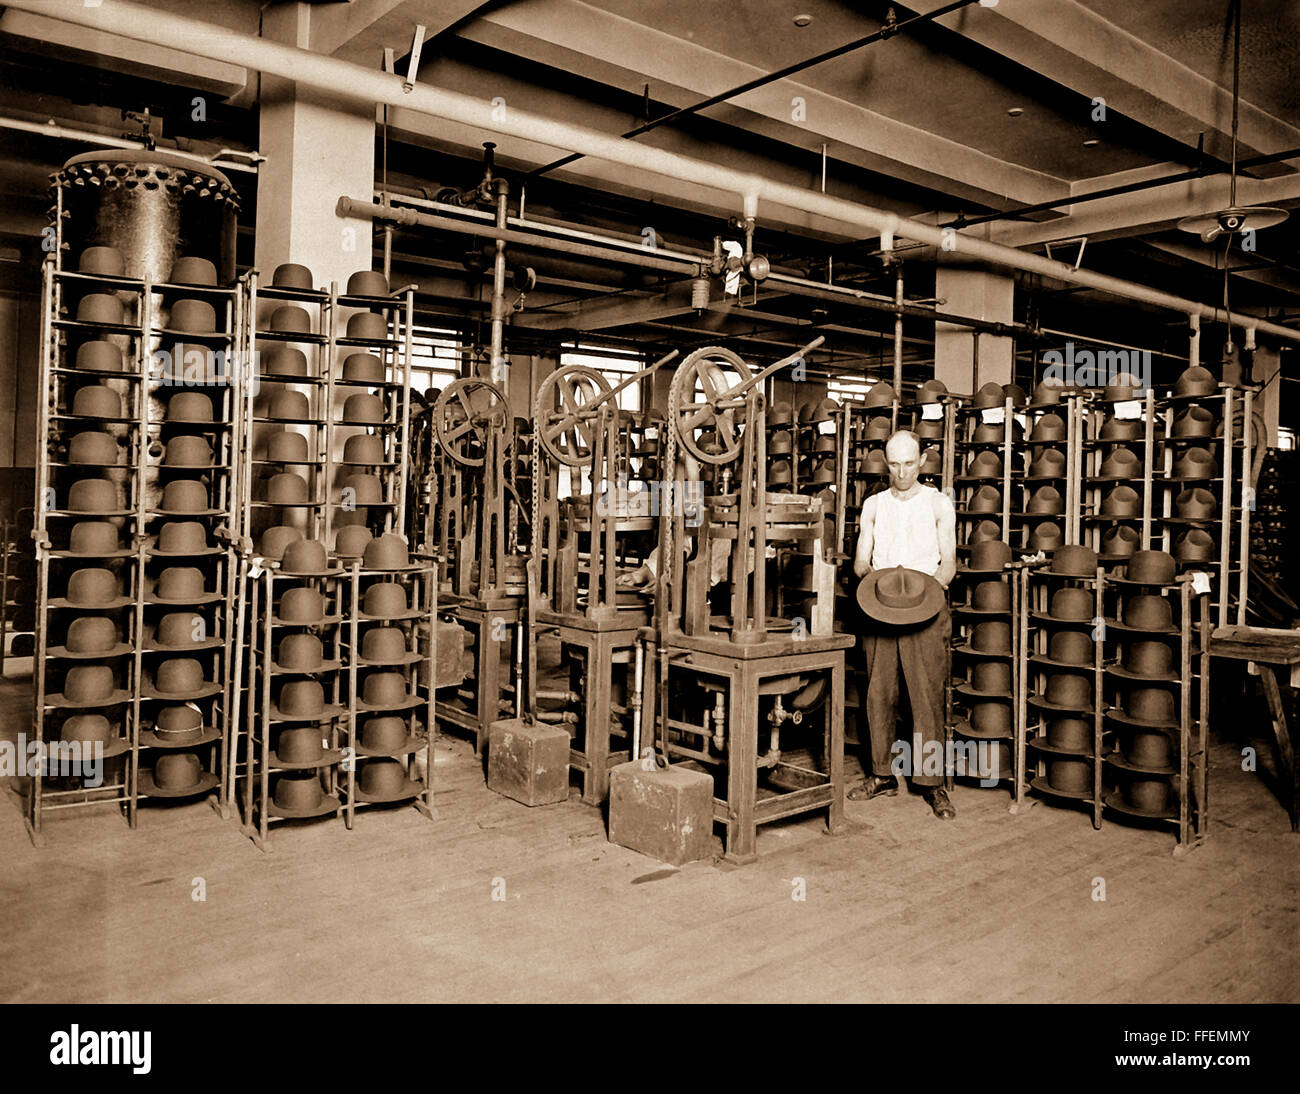 Hats manufactured for American soldiers by John B. Stetson Co., Phila., Pa.  Pressing Army service hats.  Ca.  1917-18. Stock Photo